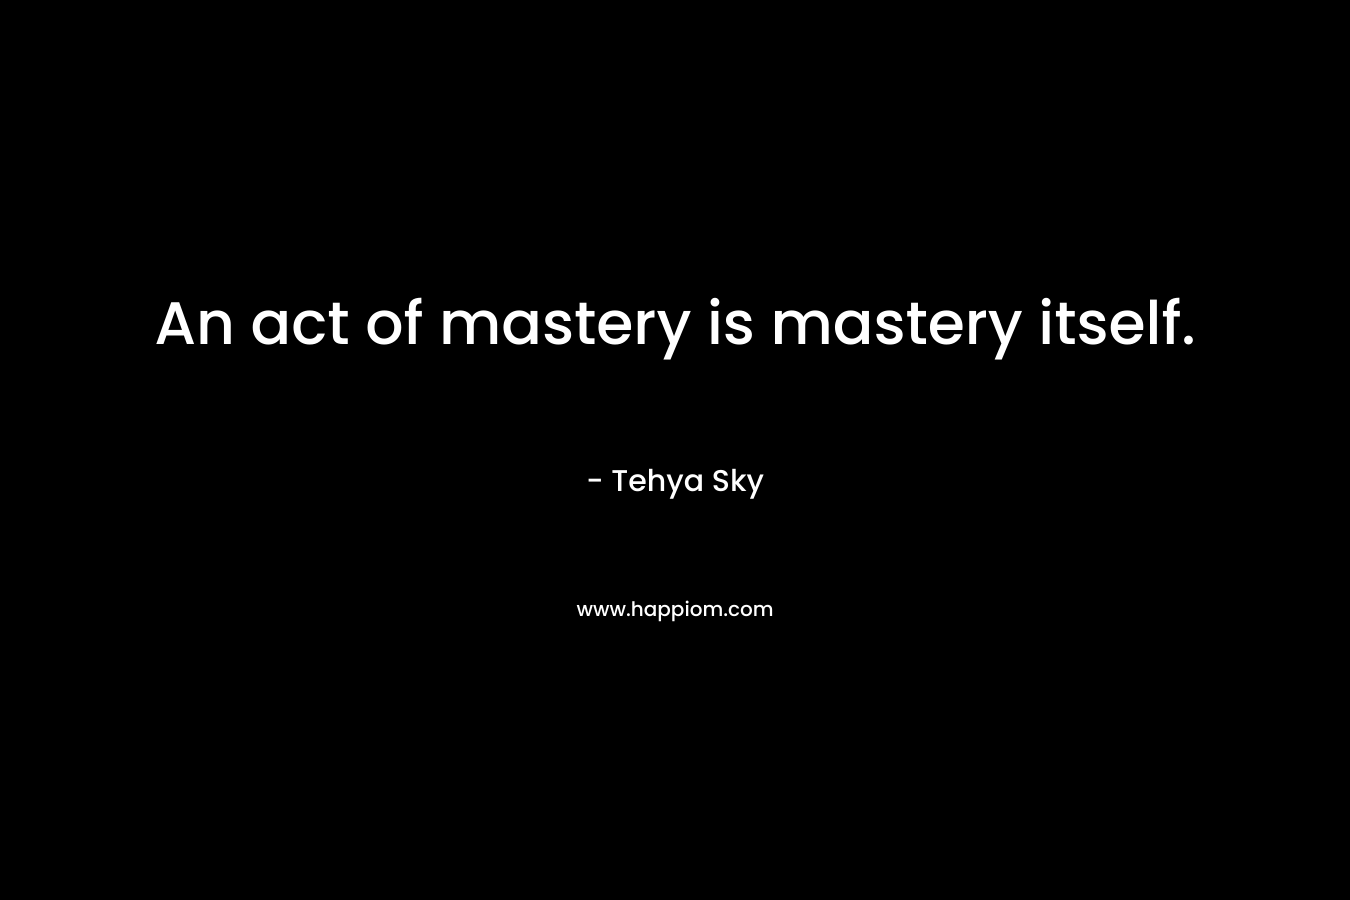 An act of mastery is mastery itself. – Tehya Sky